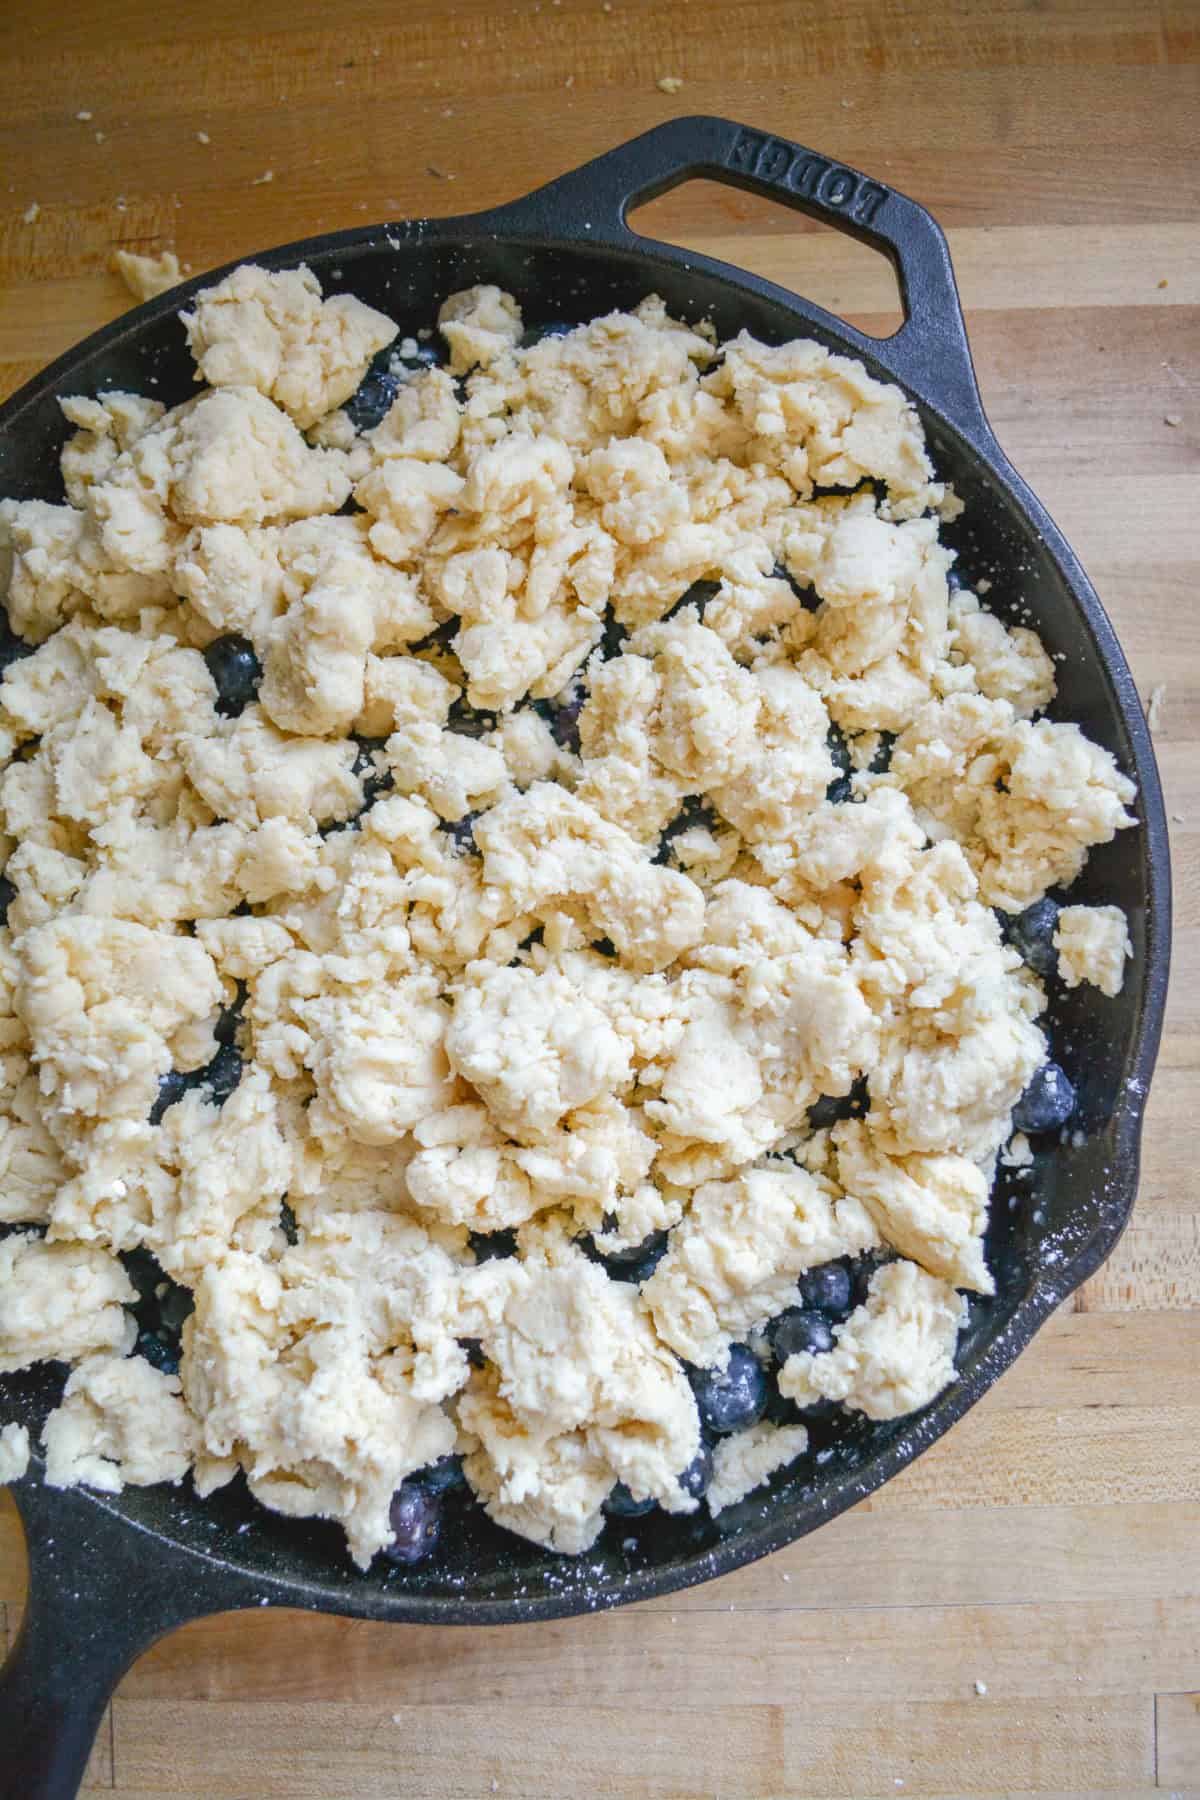 Biscuit topping scattered across the top of the blueberry mixture in a cast iron pan.